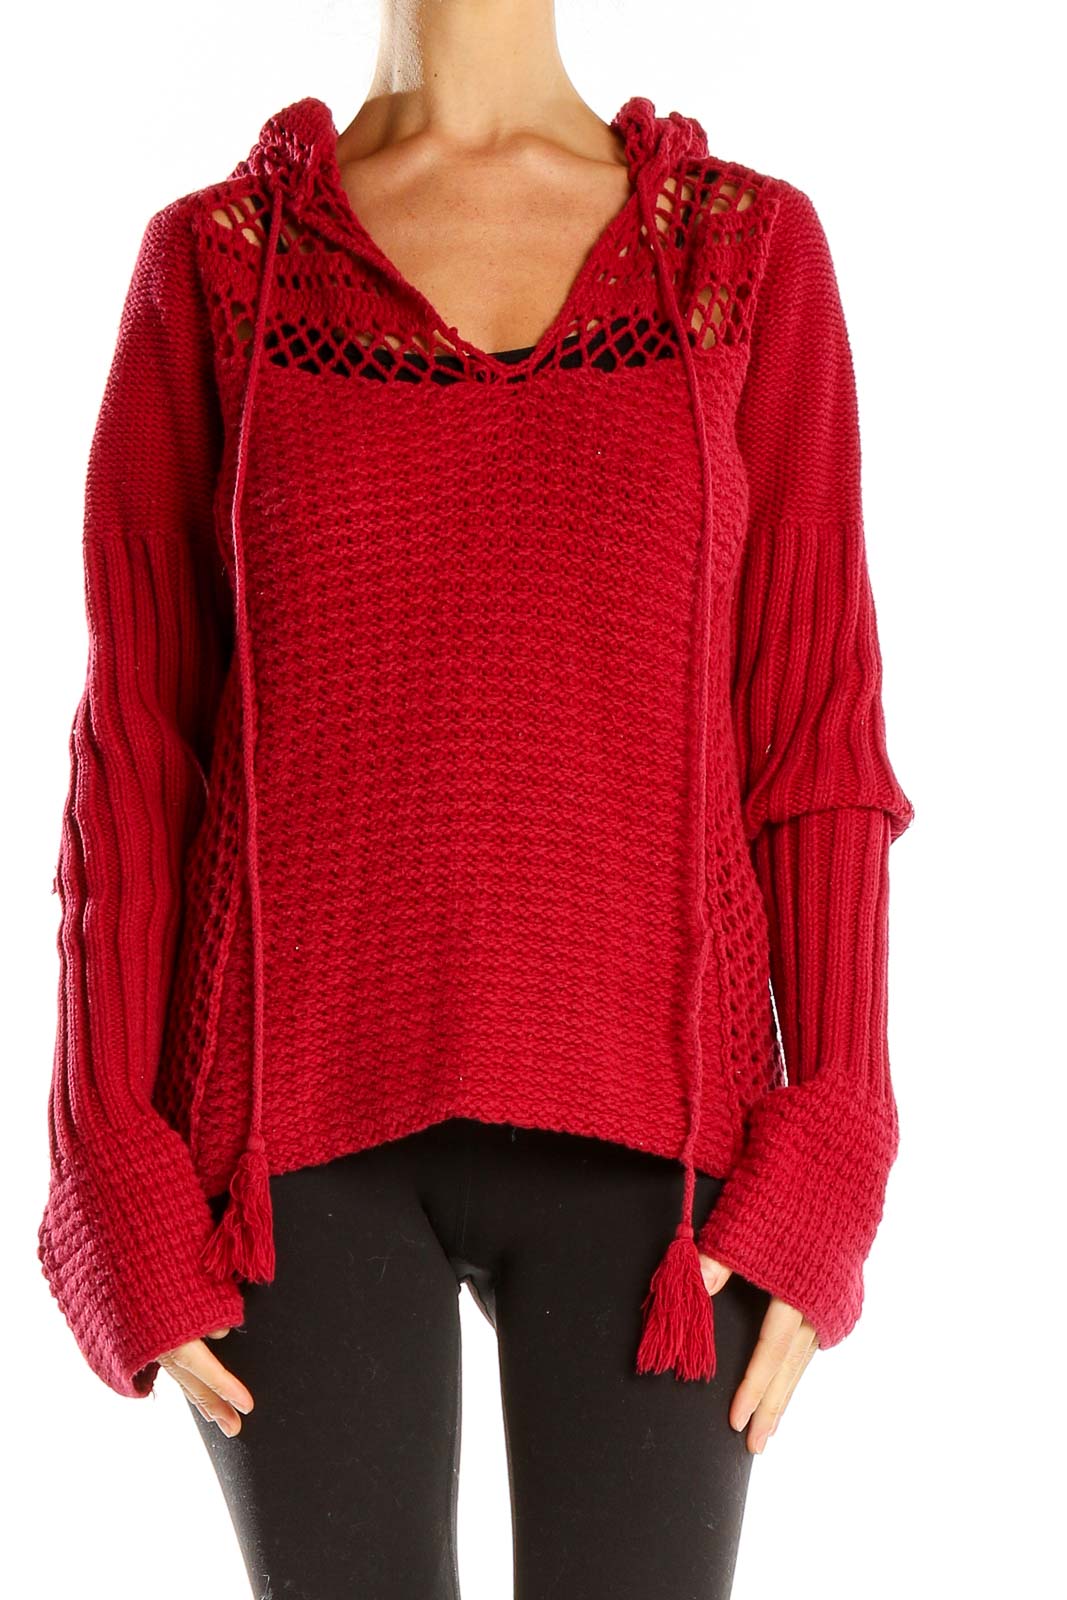 Red Crochet Bohemian Top Front